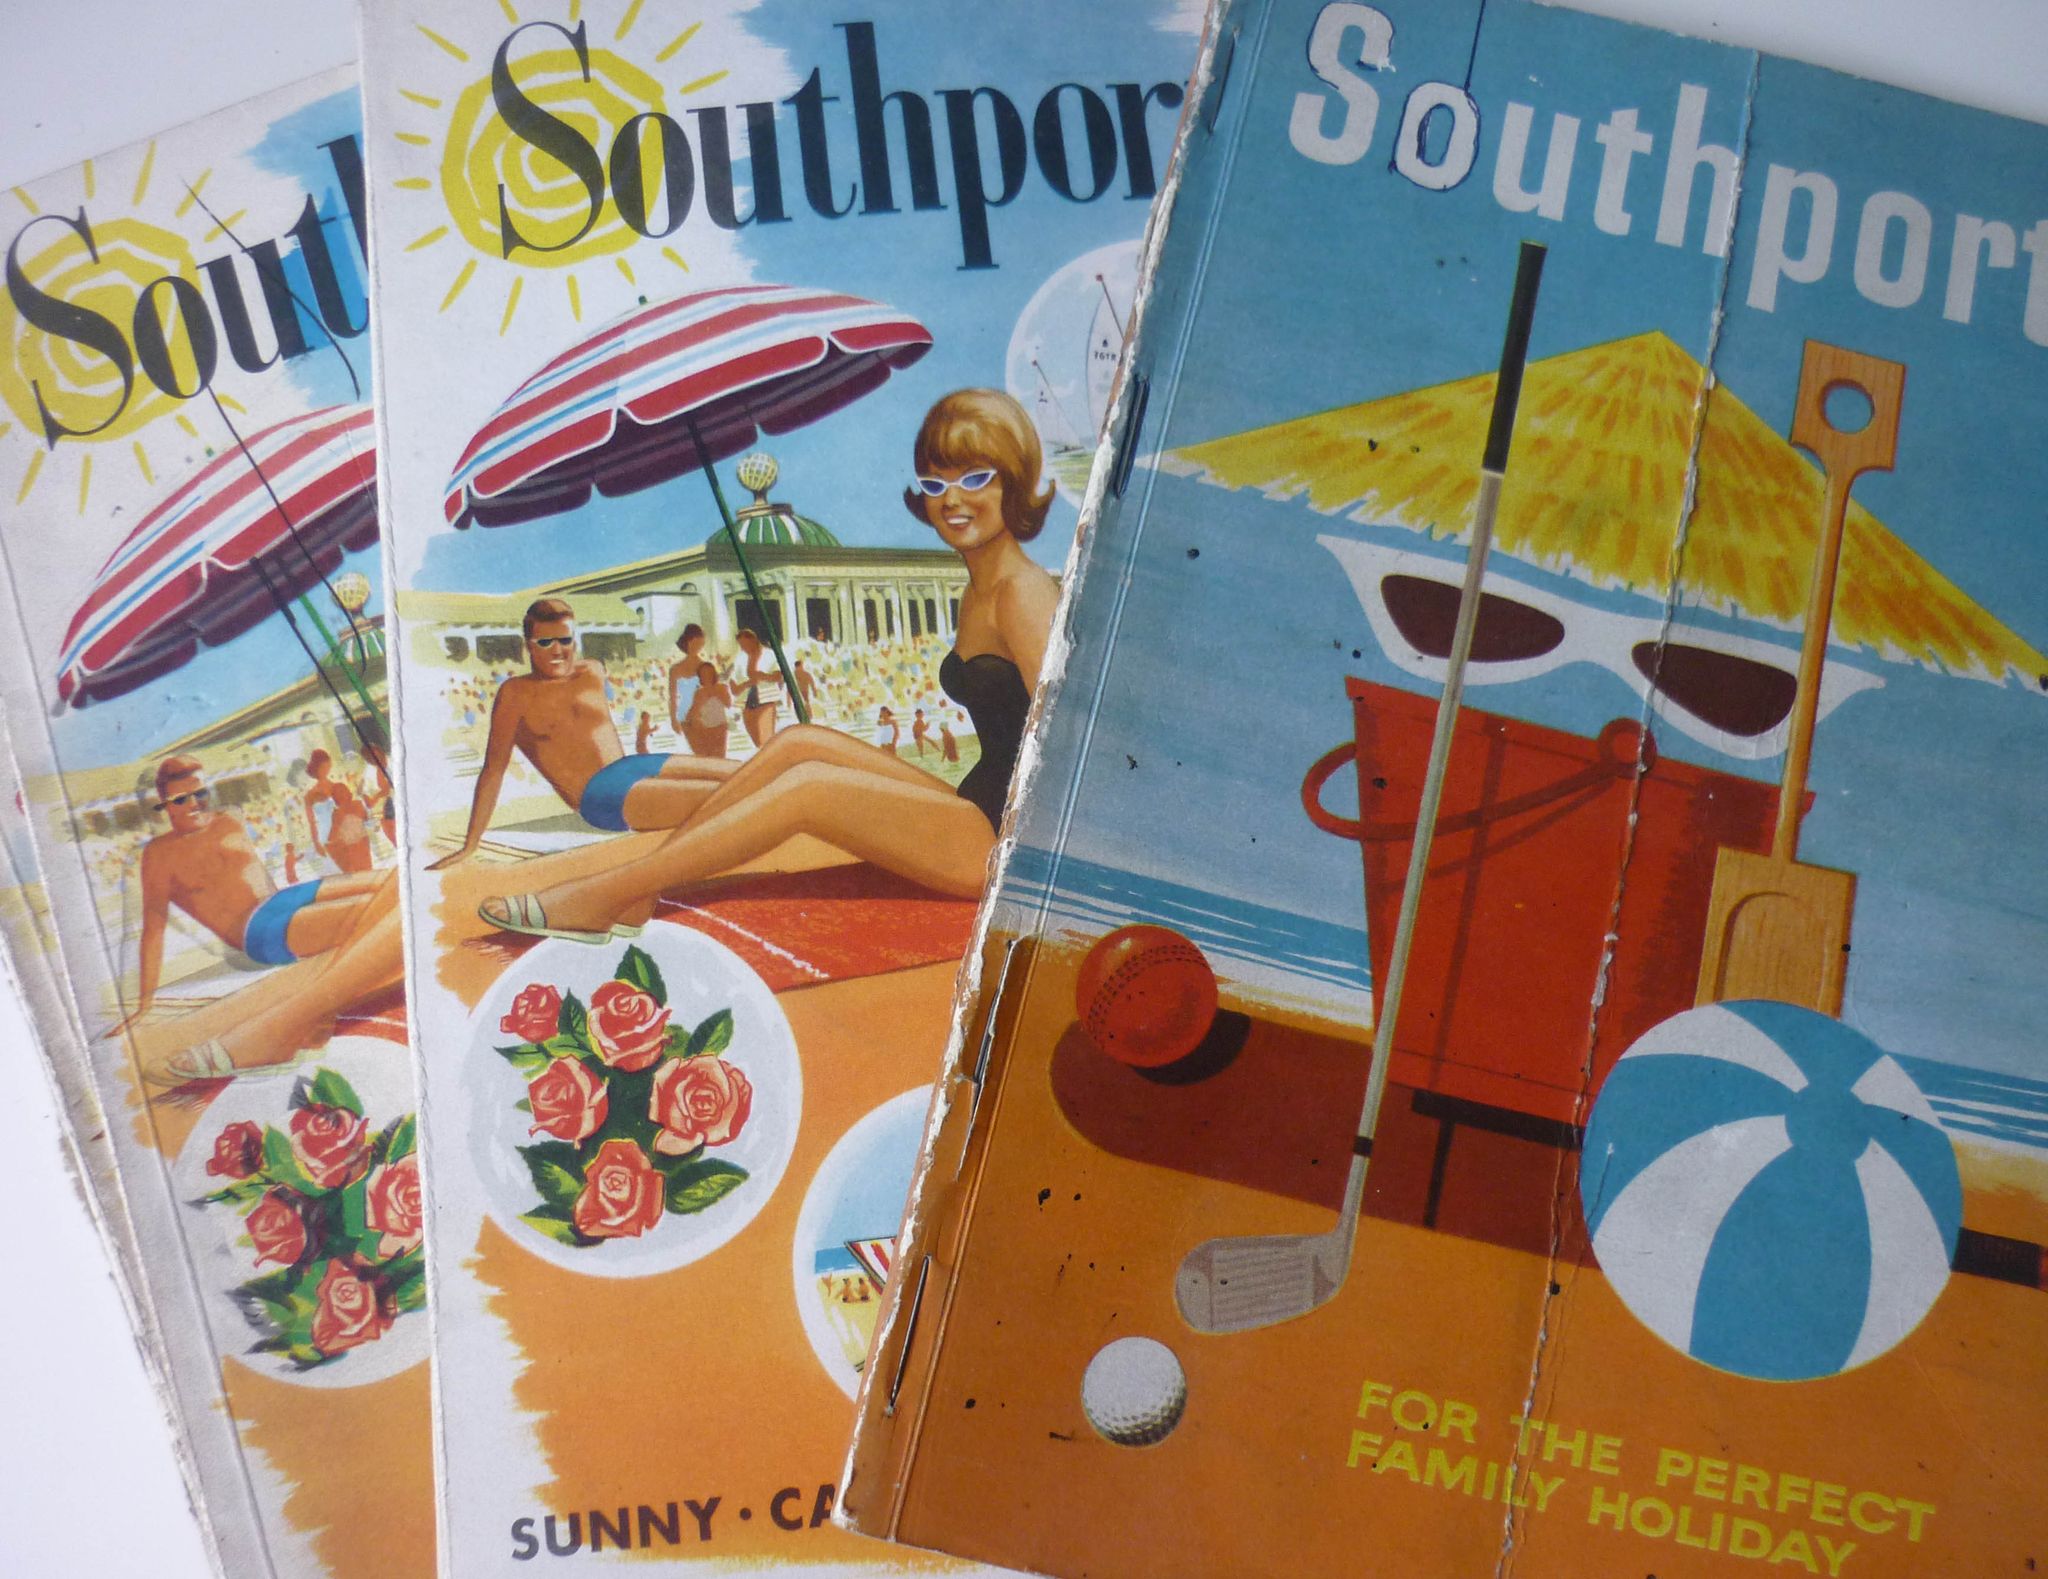 Remarkable old images of Southport in the 1960s, some from old Southport Guide Books, have been discovered in a loft in the town, bringing back some incredible memories for people.